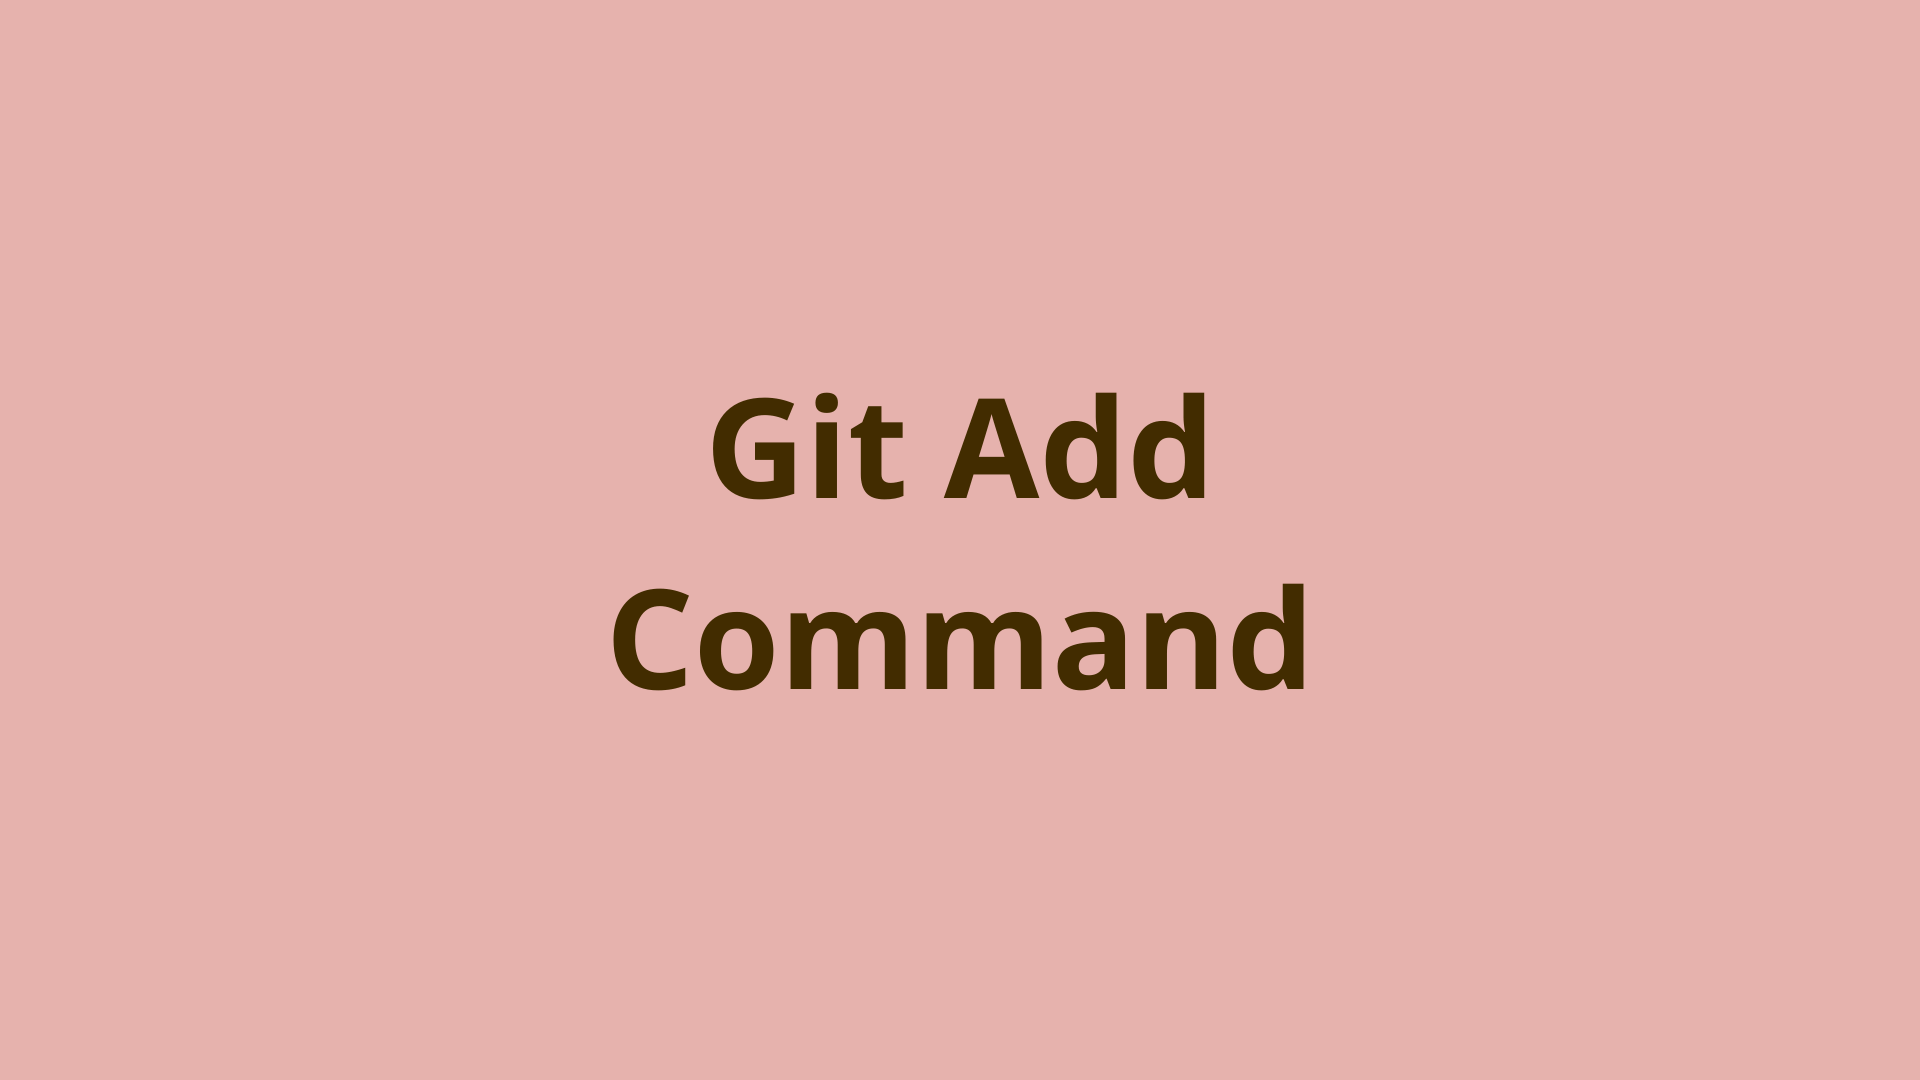 Image of Git Add | Adding Changes to Git’s Staging Area